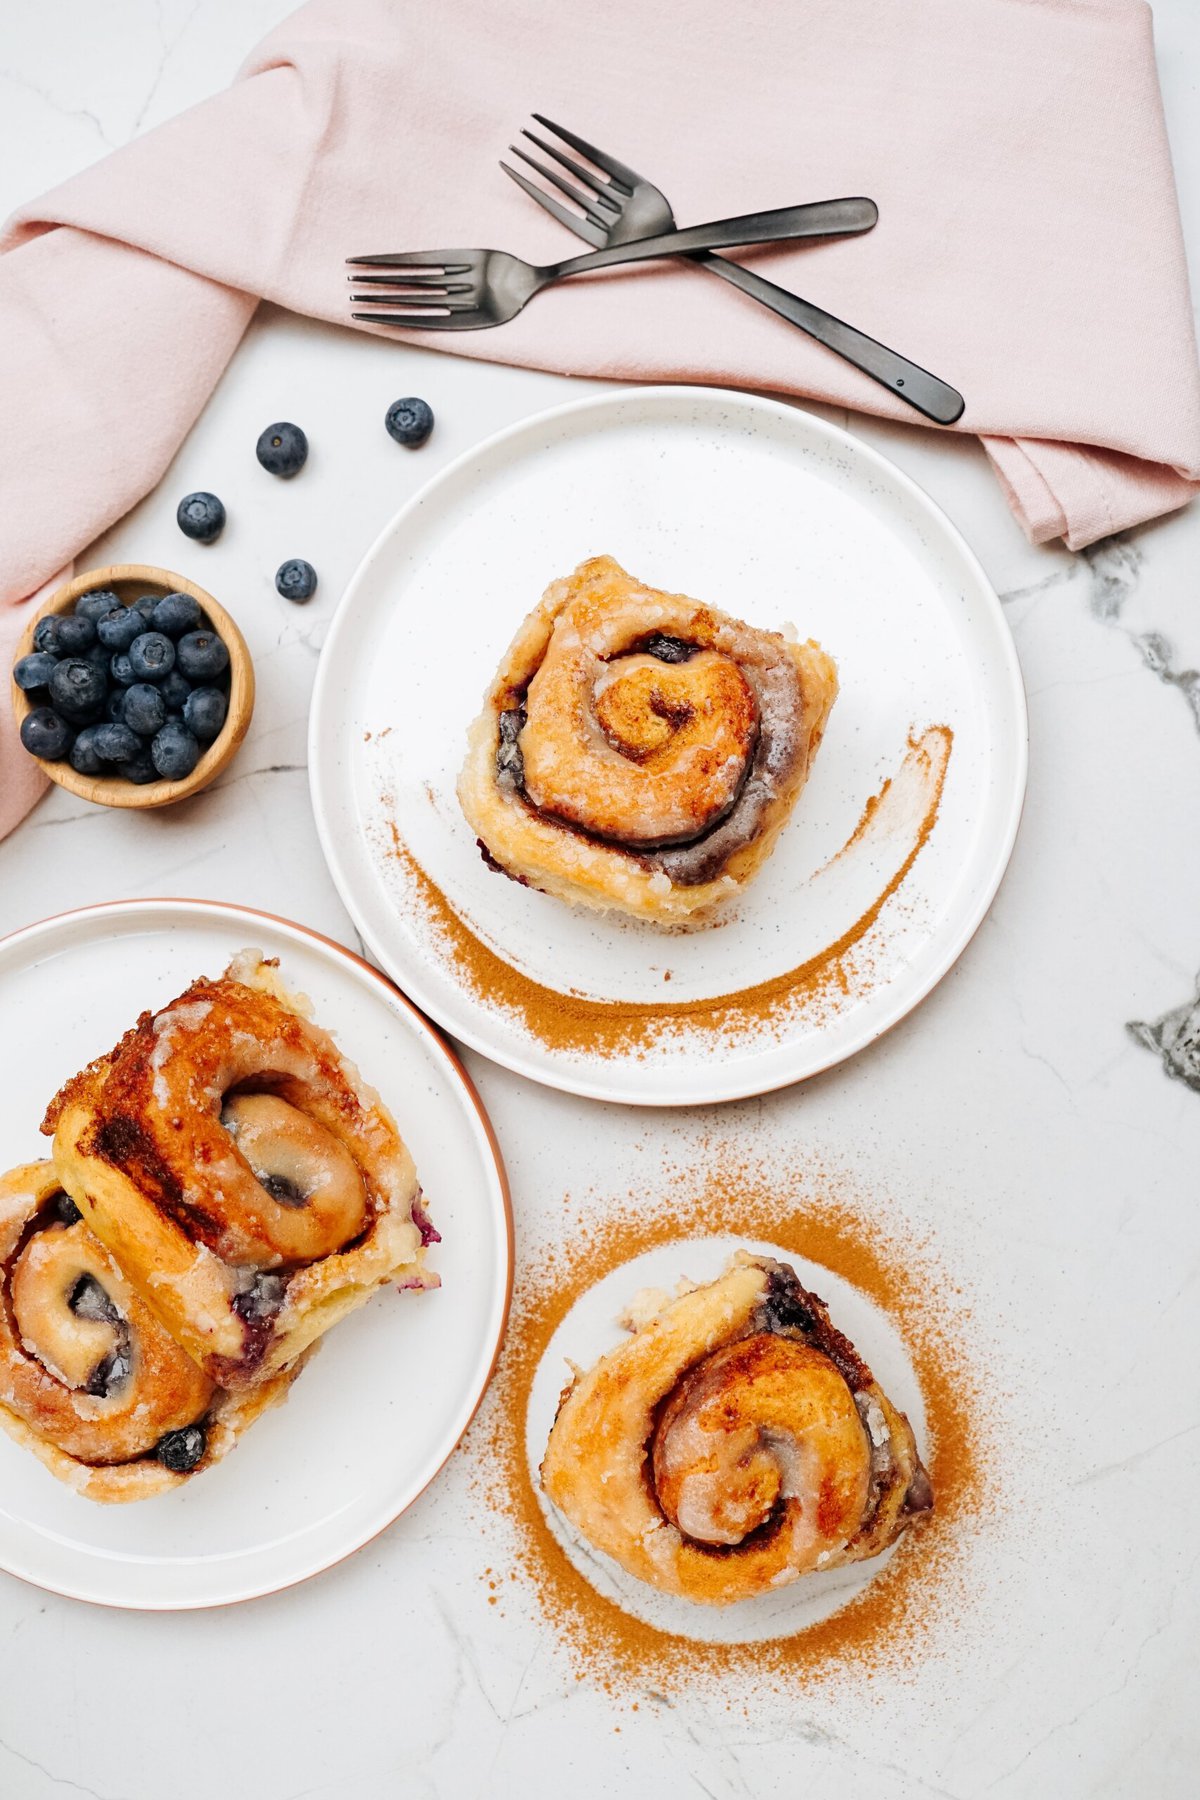 Top view of three cinnamon rolls on white plates, elegantly garnished with cinnamon powder. A small bowl of blueberries and two forks neatly placed on a pink napkin are positioned nearby.